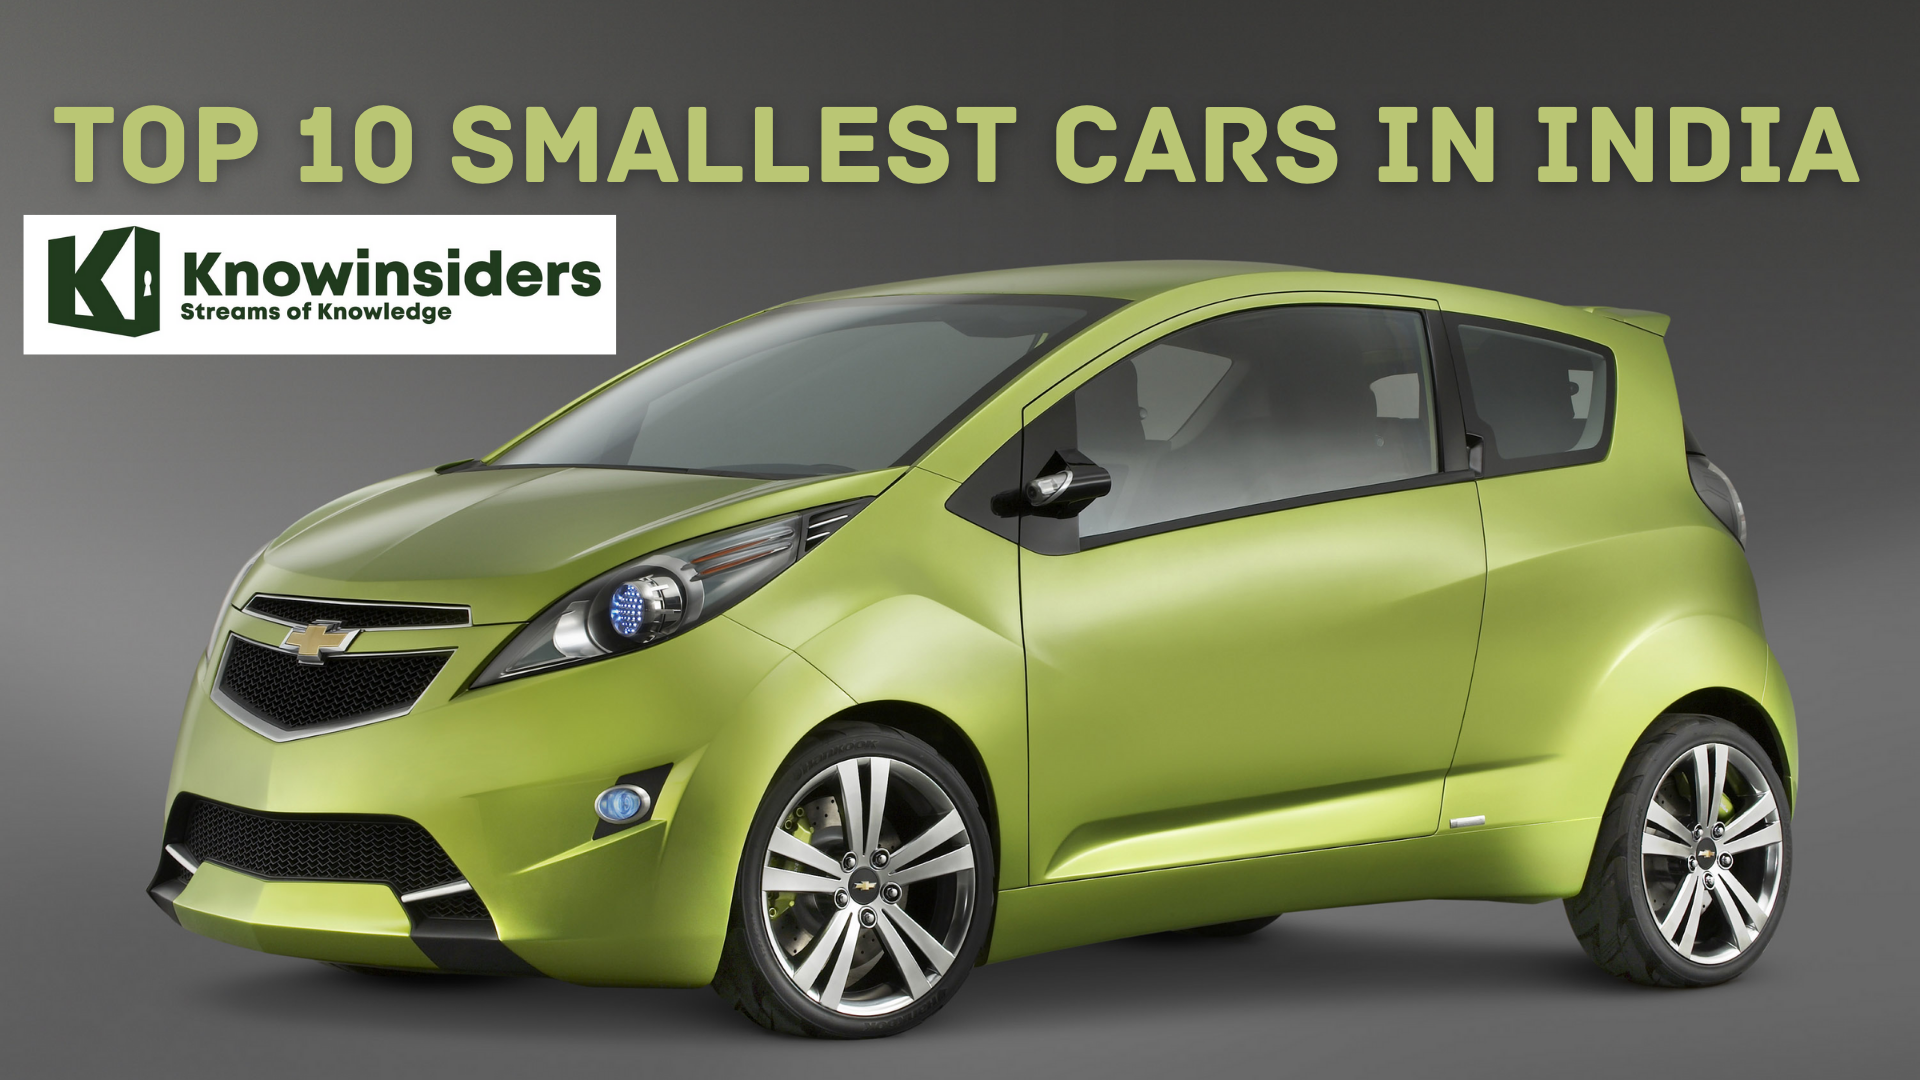 Top 10 Cars - Smallest in India